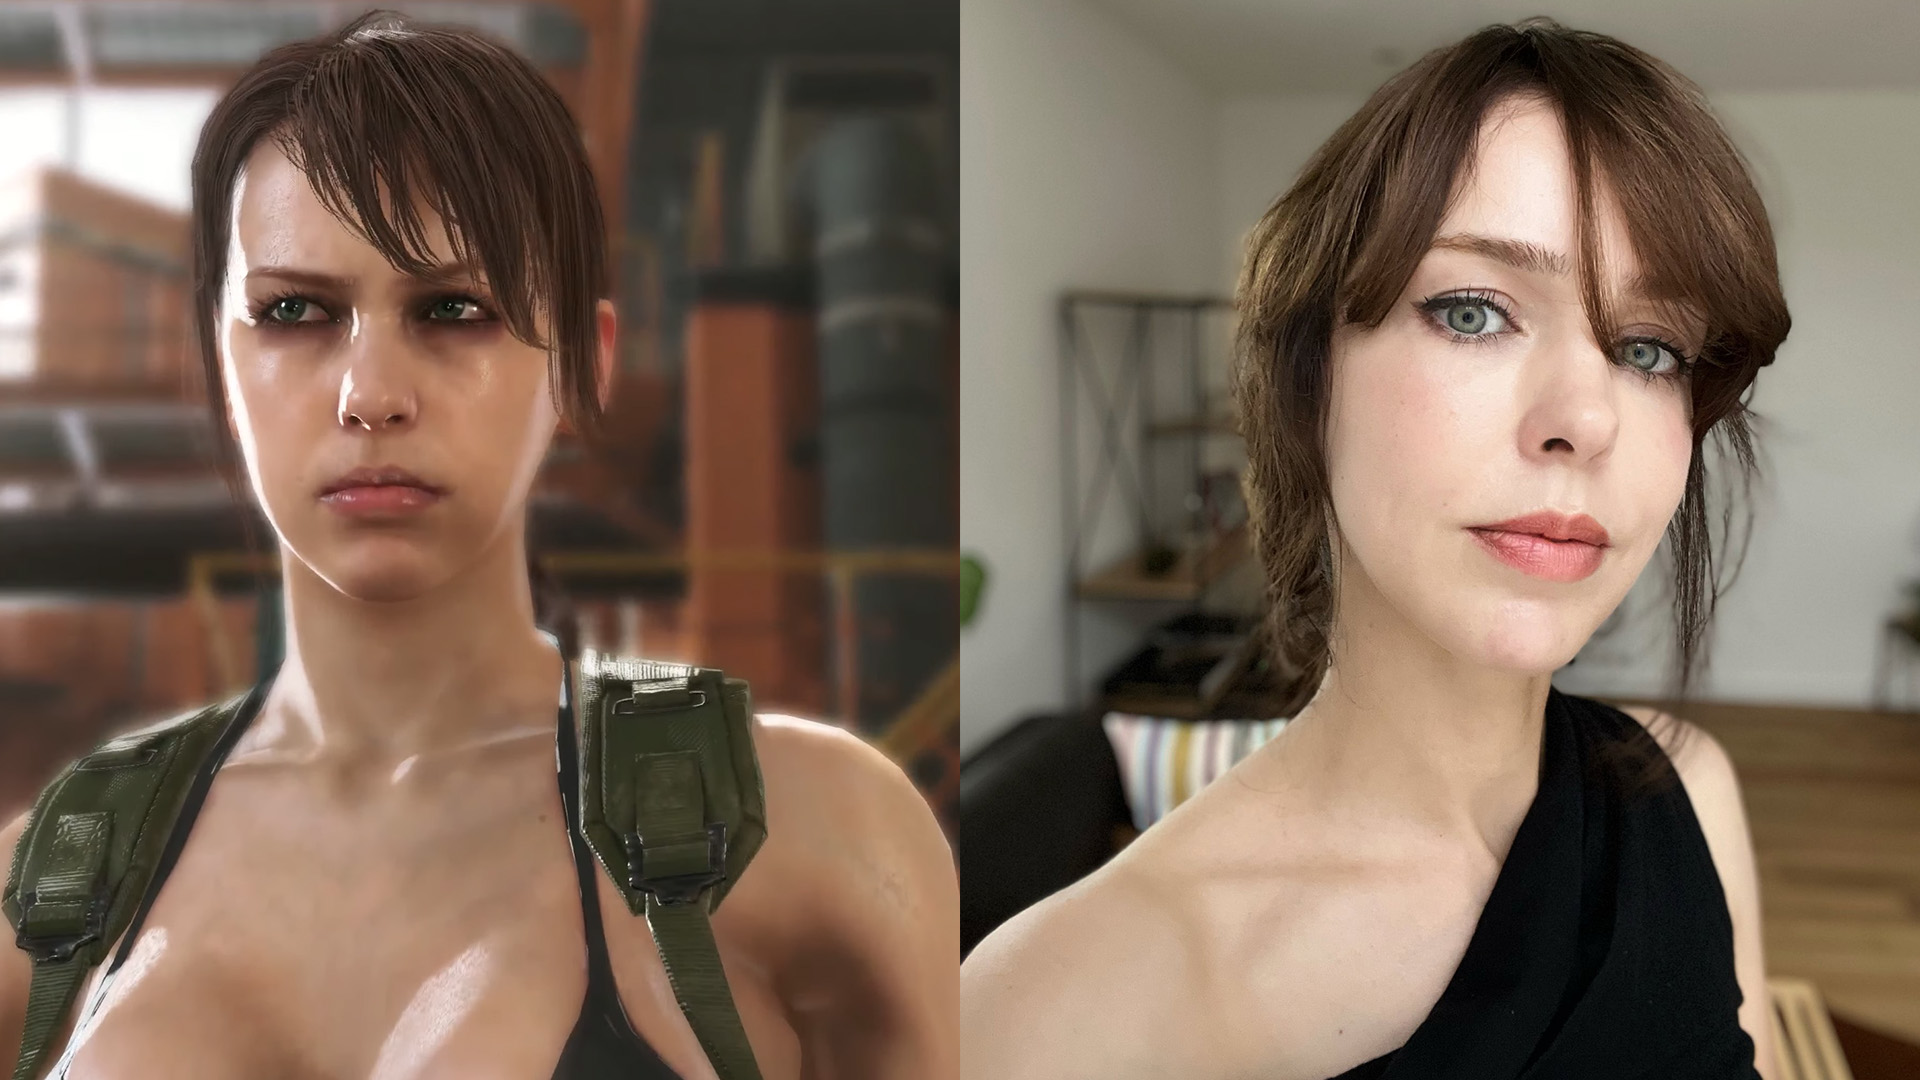 Metal Gear Solid 5’s Quiet actress reflects on ‘very revealing costume’: ‘I understand the perspective of people not as happy with how she was portrayed’